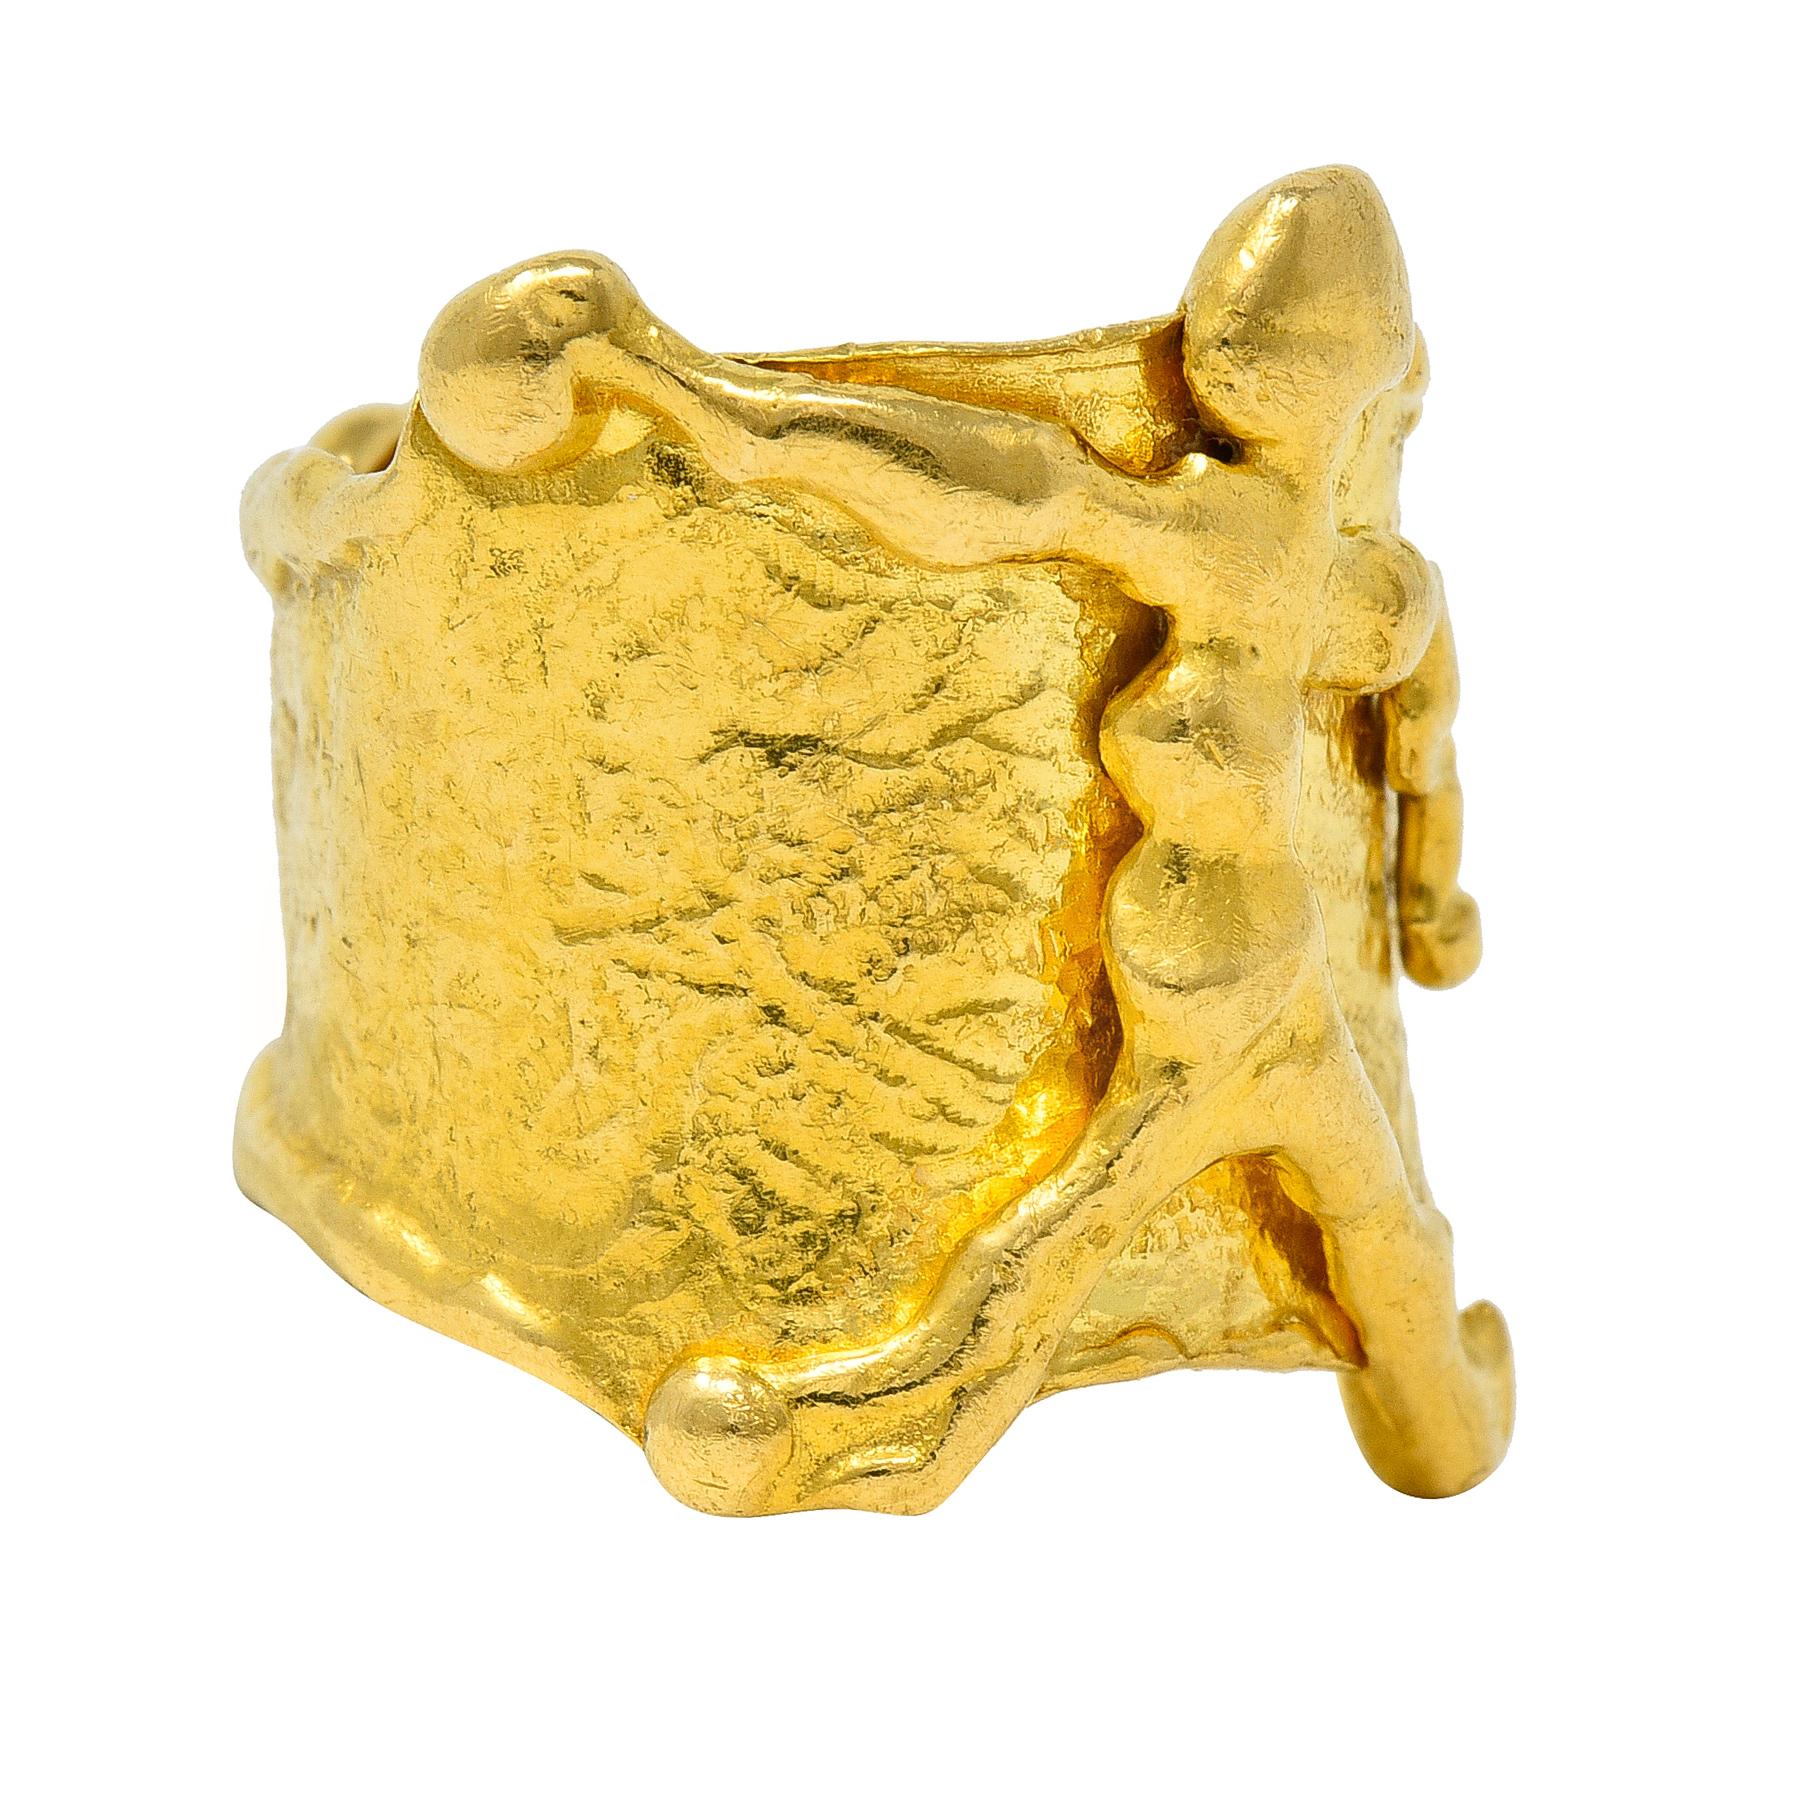 Designed as a tapered wide band ring with globular edges and organic texture throughout. Centering a raised stylized stick figure with raised arm. Organic and matched in globular style. Stamped 22k for 22 karat gold. With maker's mark for Jean